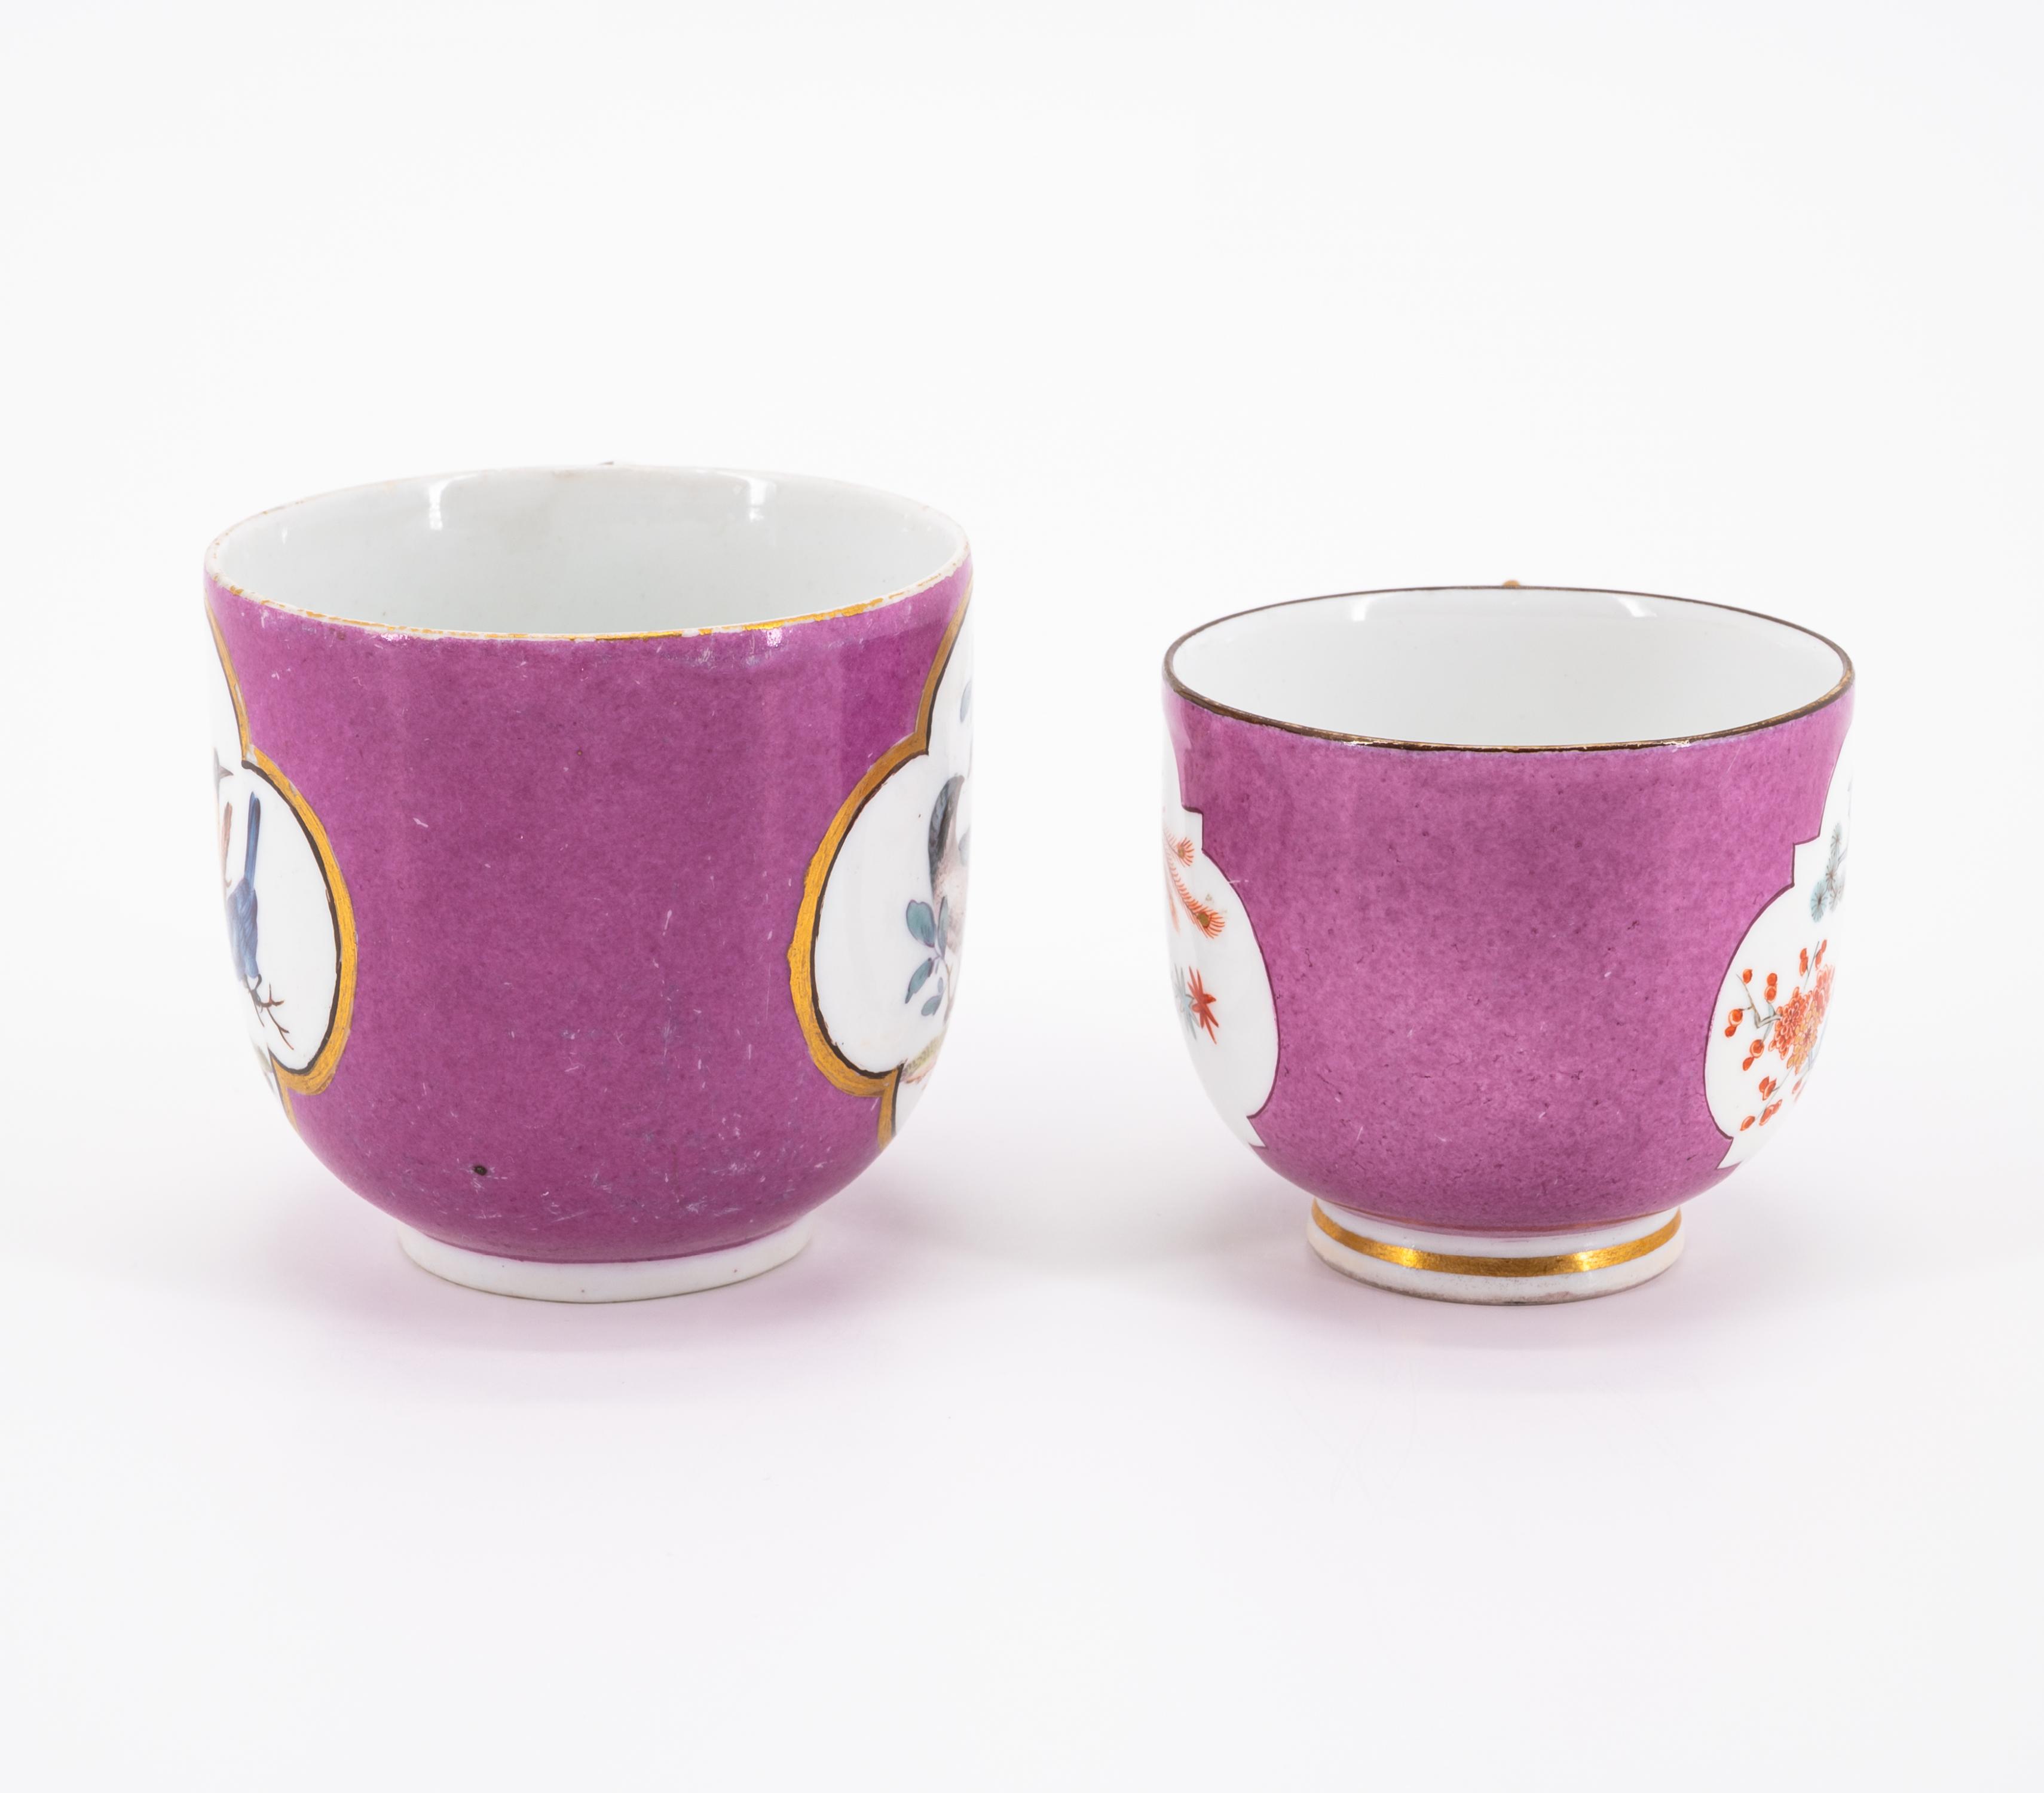 ONE PORCELAIN CUP AND SAUCER WITH QUAIL DECOR & TWO CUPS WITH PURPLE BACKGROUND AND BIRD DECOATIONS - Image 4 of 11